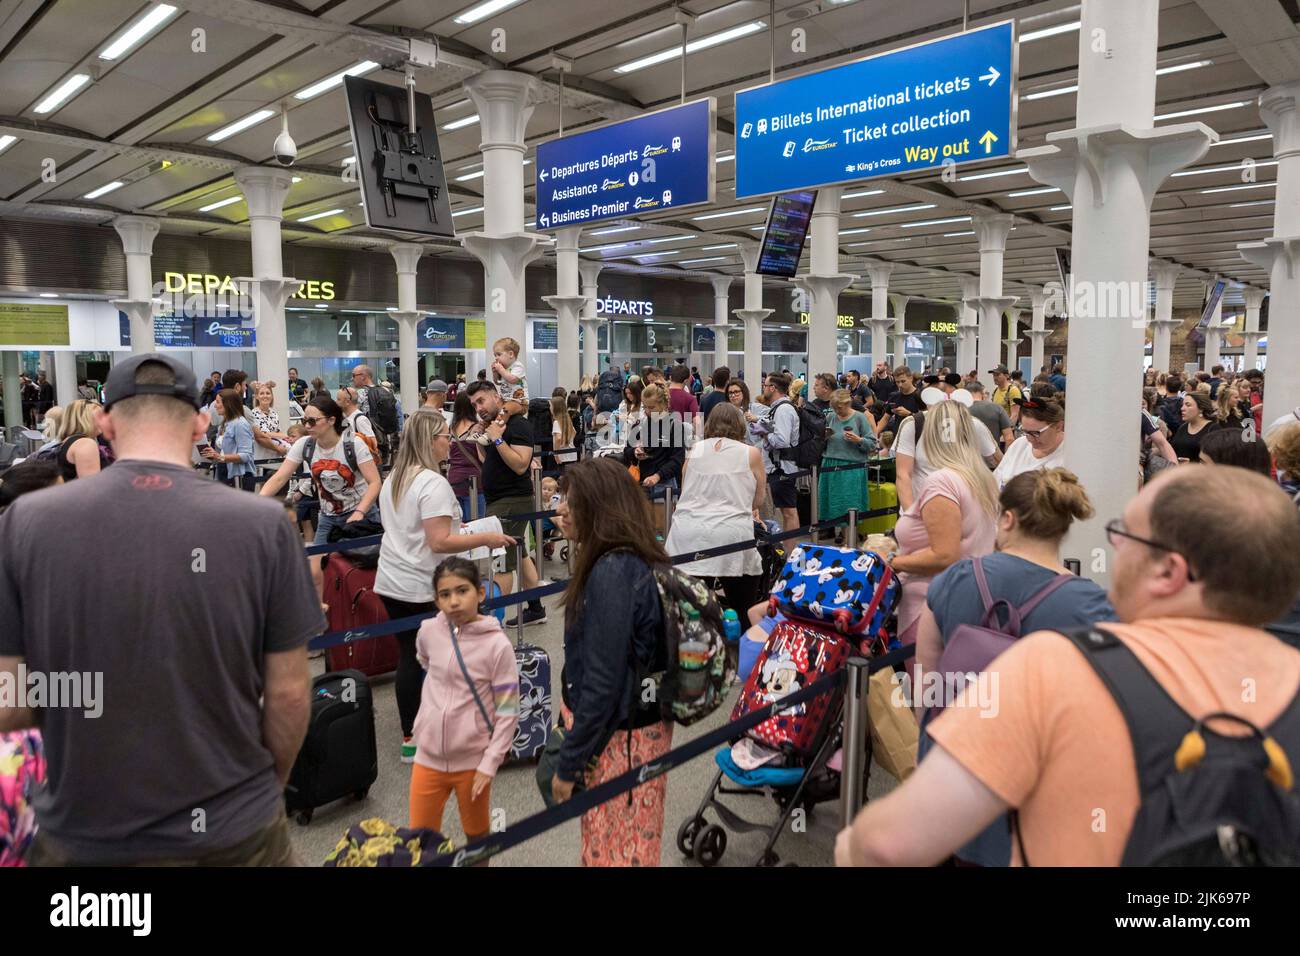 Eurostar travellers form long queues that go all the way up the departure hall at London King’s Cross St. Pancras this morning.   Image shot on 29th J Stock Photo